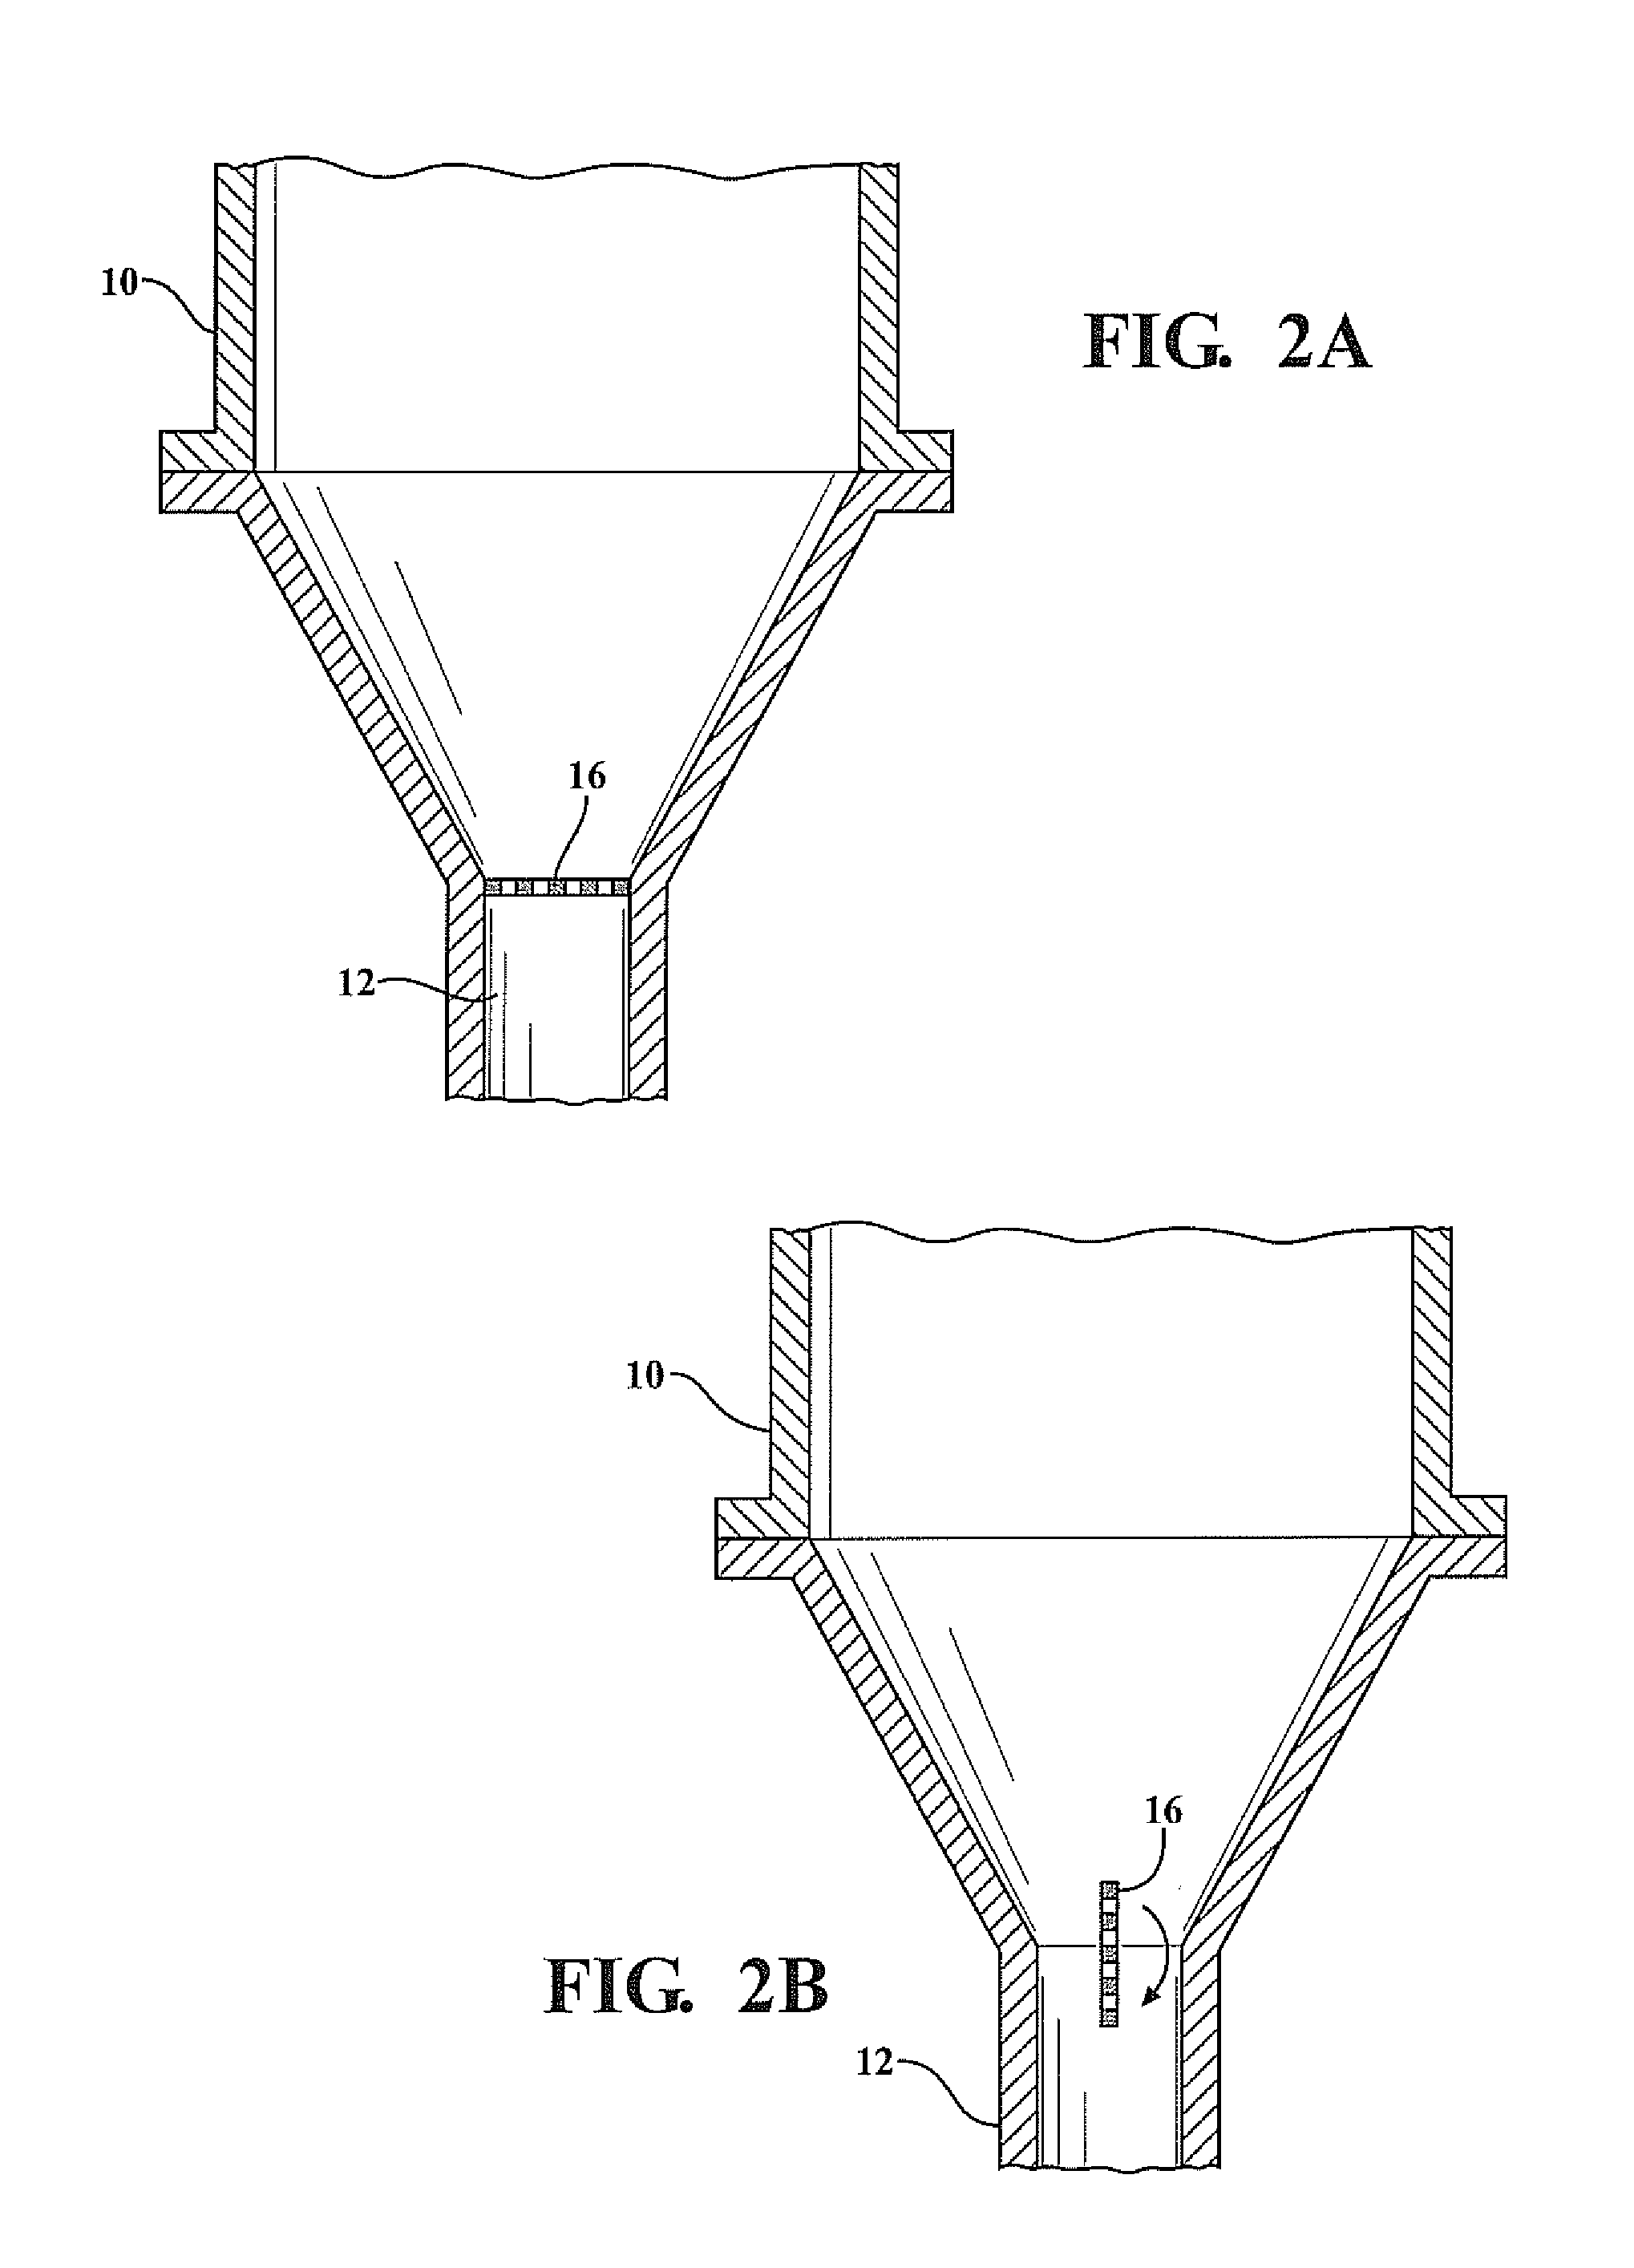 Fluidized bed coffee roaster having dual-stage quenching cycle